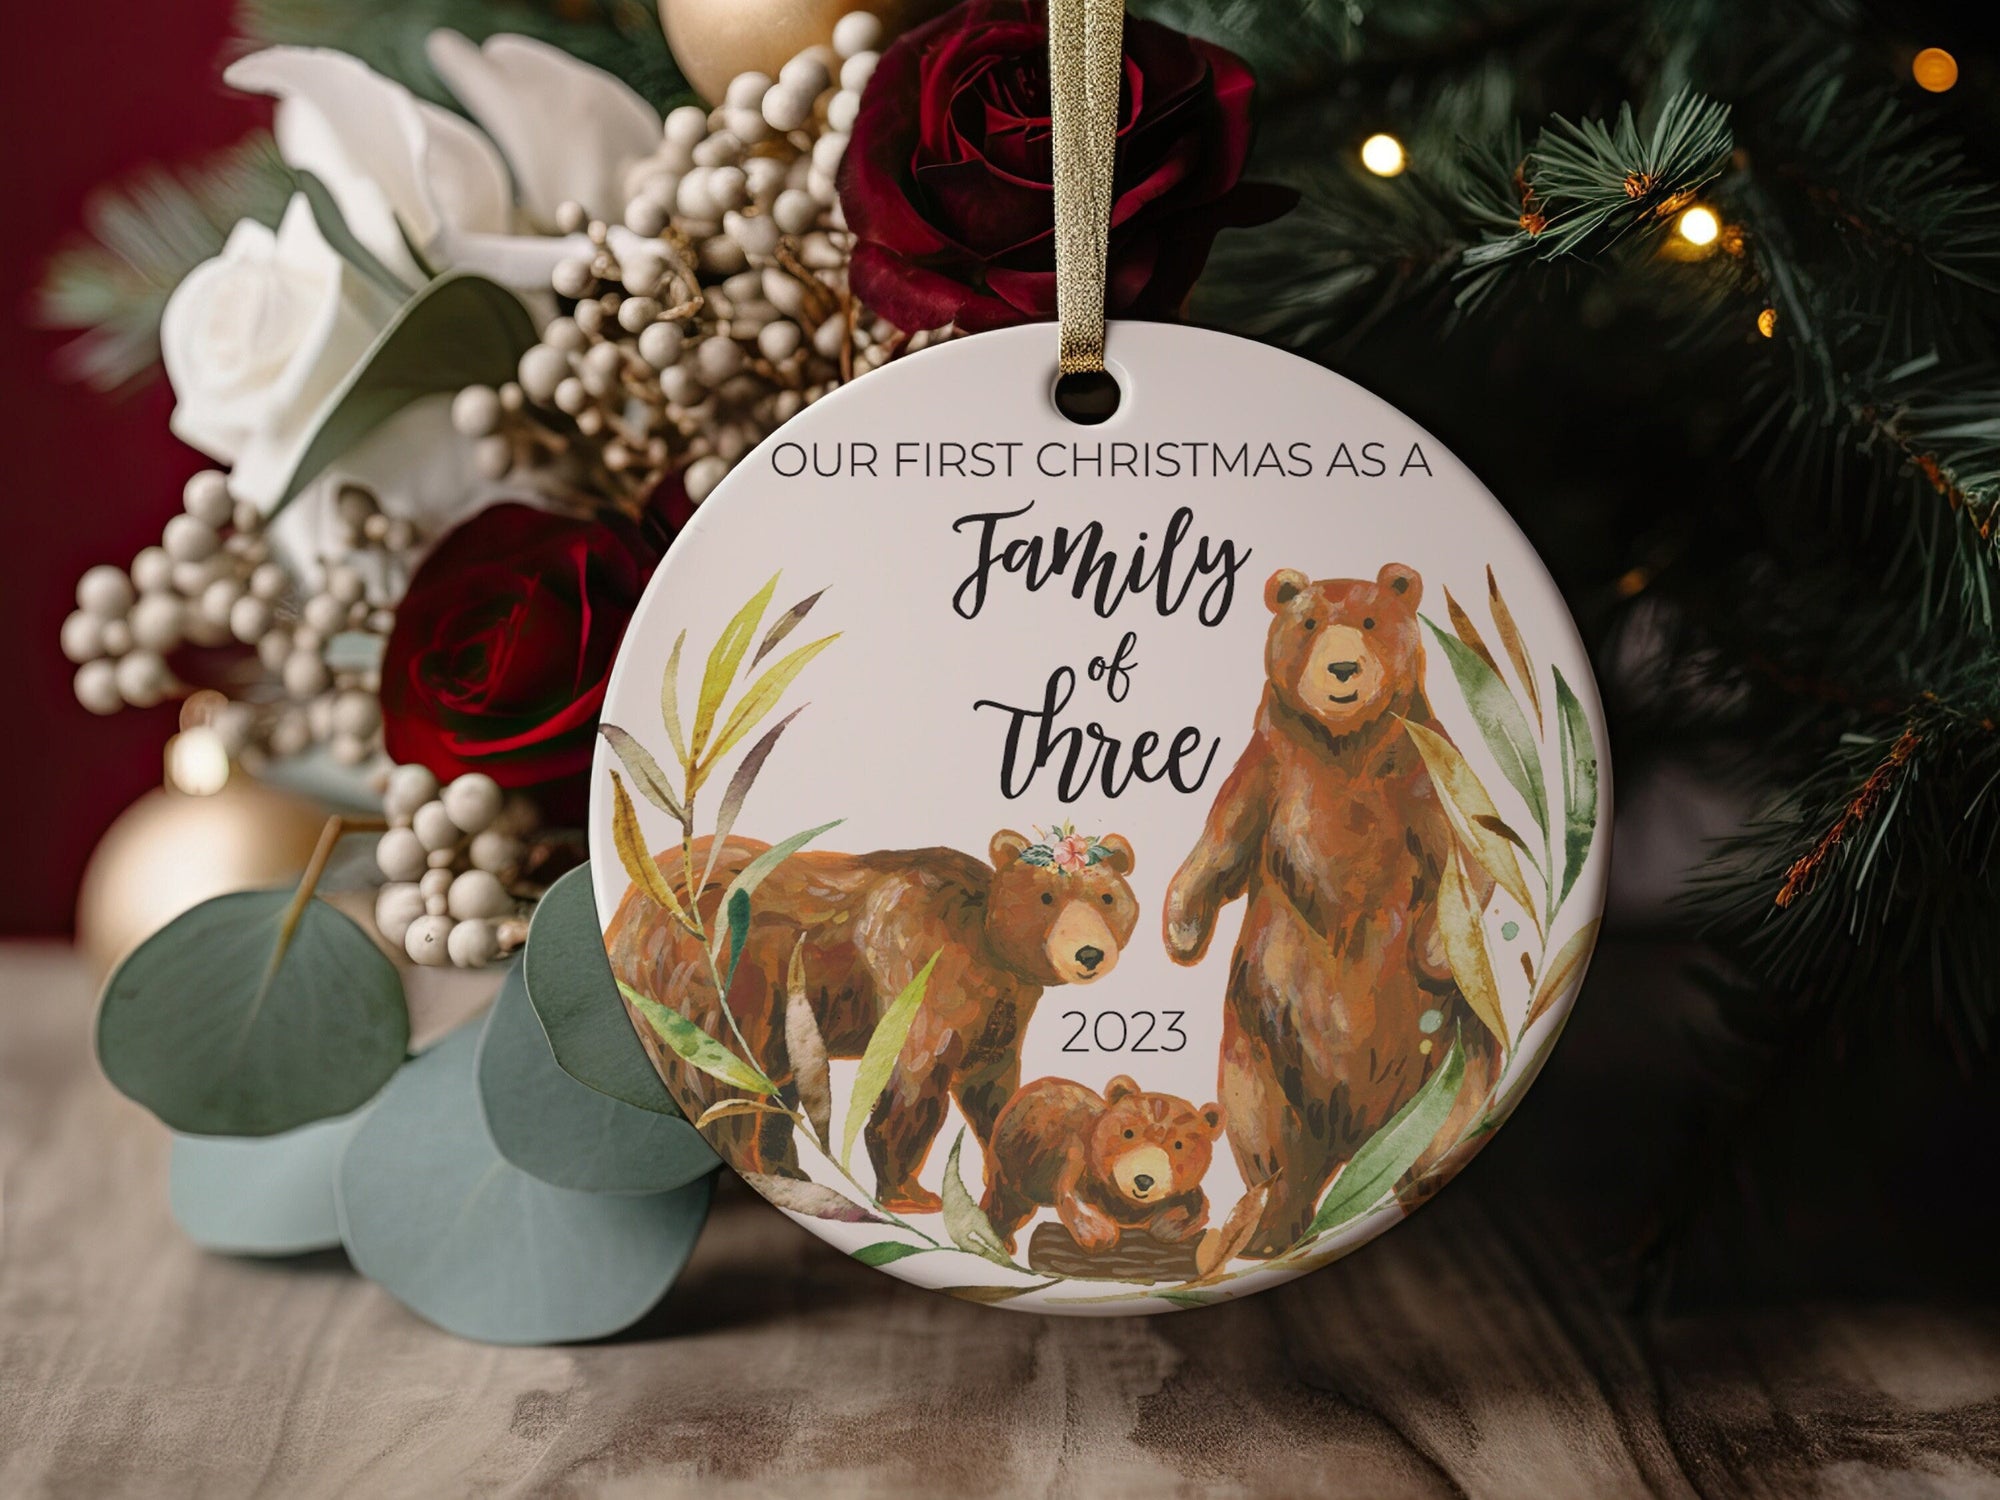 2023 Our First Christmas as a Family of Three, Bears Forest Family, New Parent Gift, Established in, New memories, First Time Parents Gift